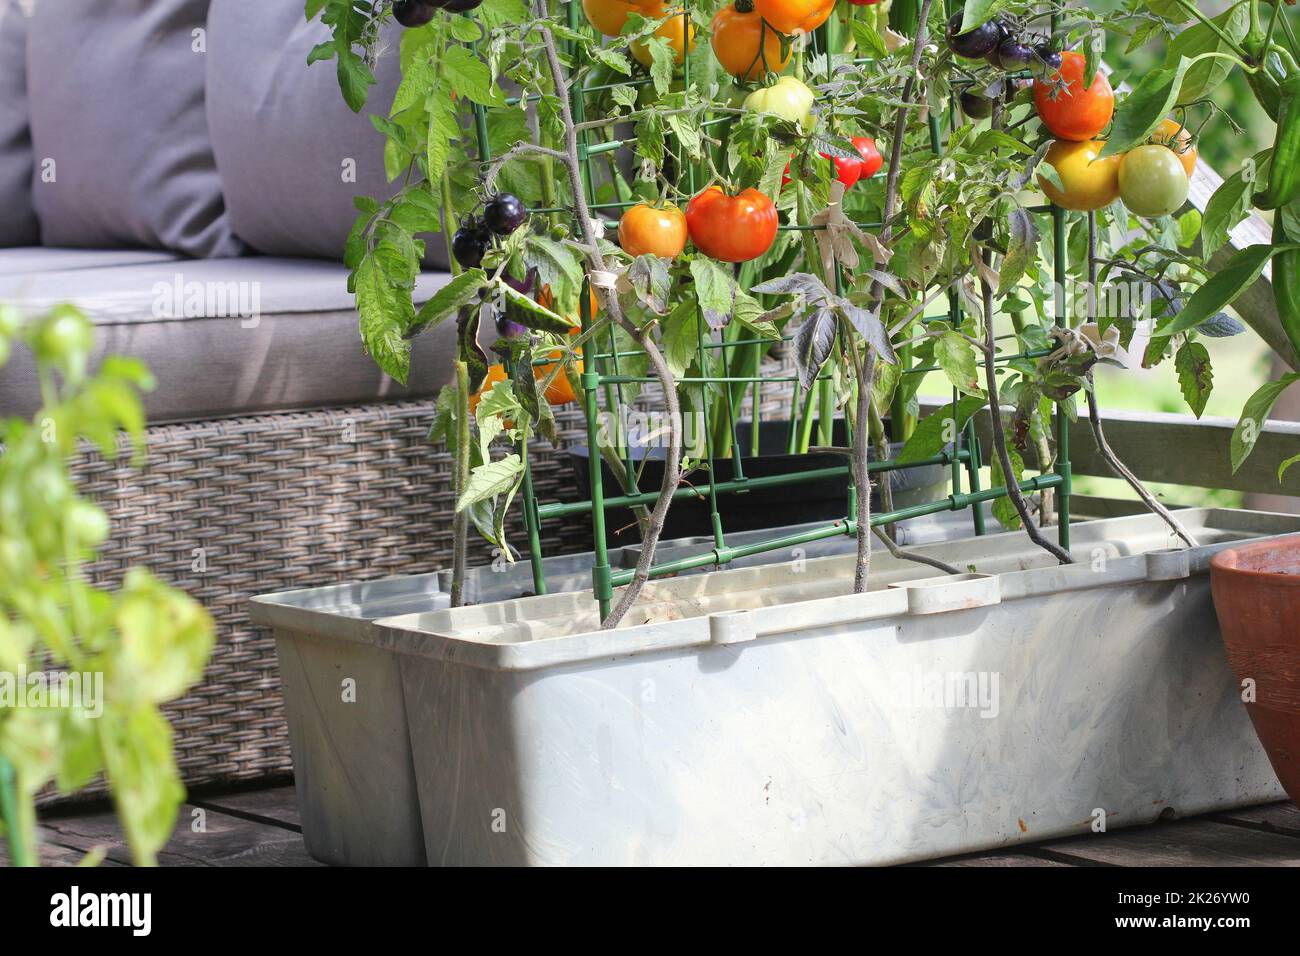 Container vegetables gardening. Vegetable garden on a terrace. Red, orange, yellow, black tomatoes growing in container Stock Photo